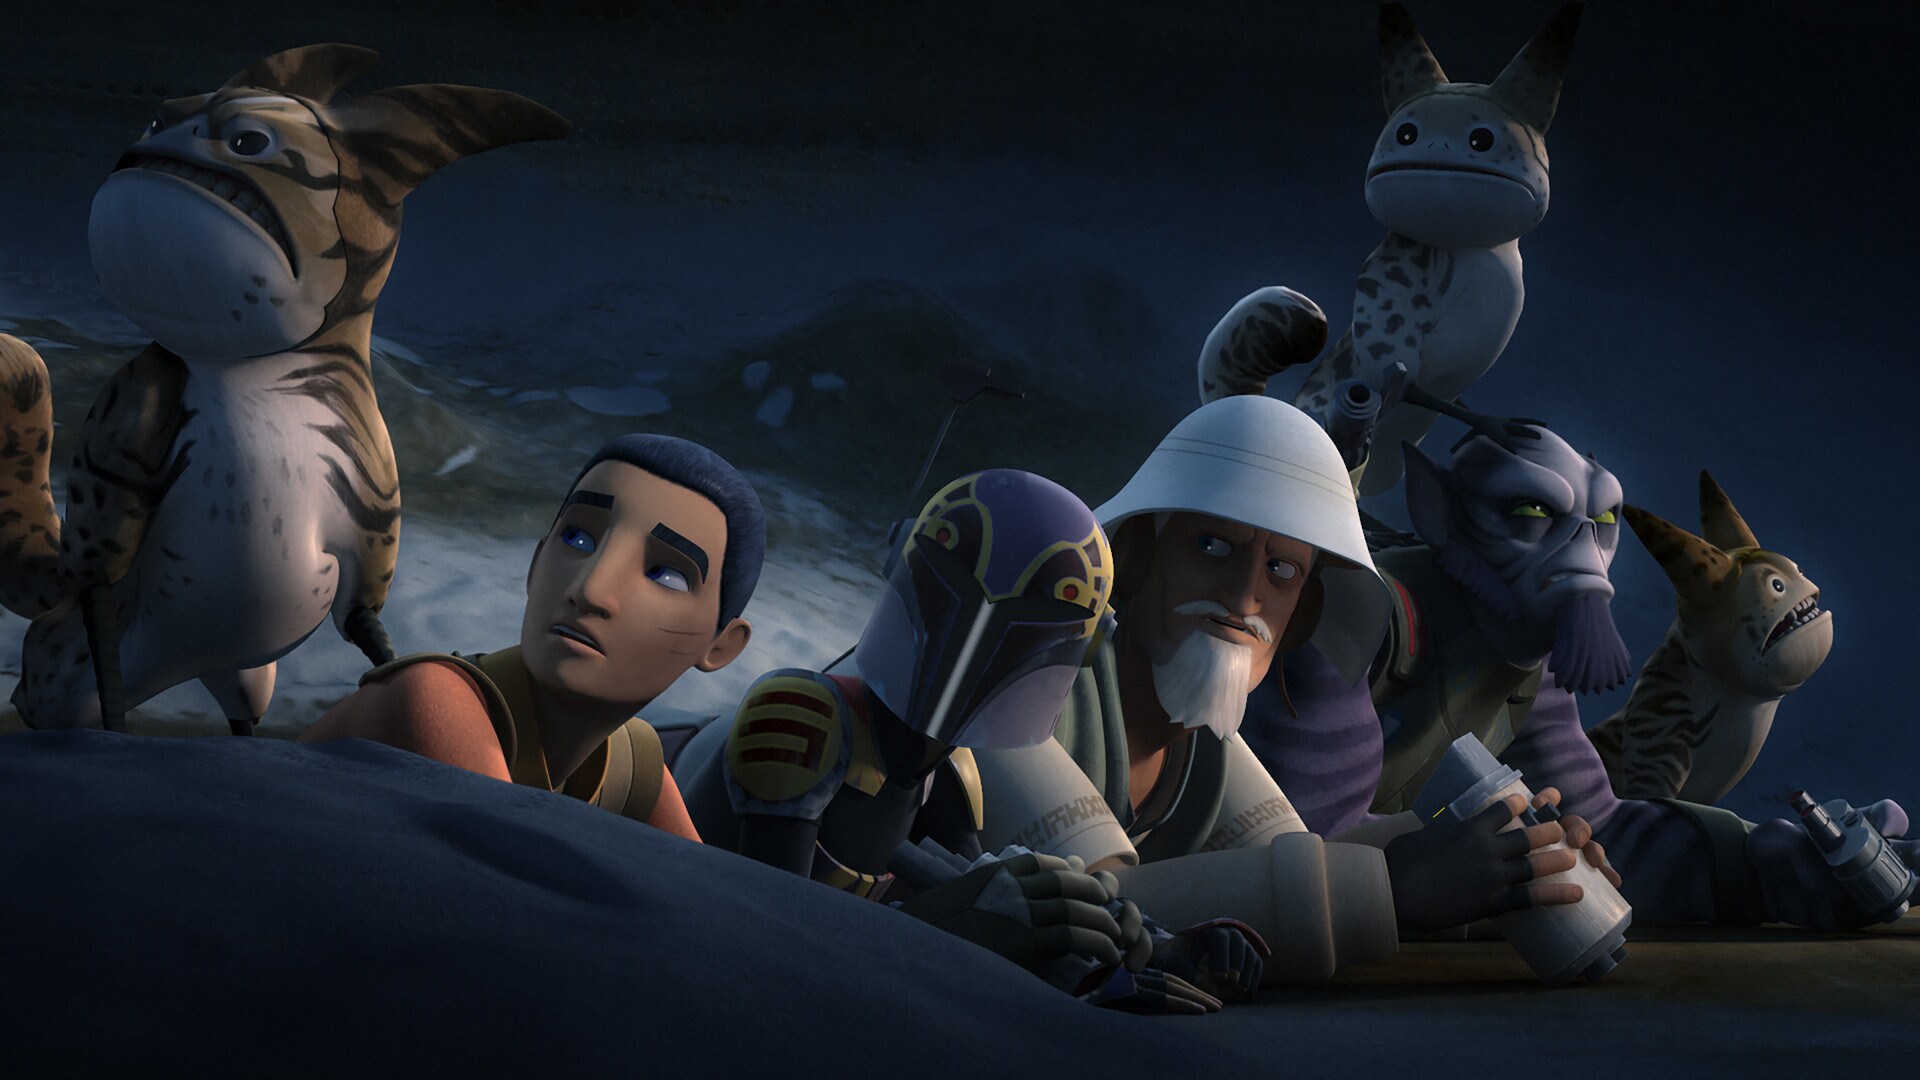 The rebels, Ryder Azadi, and some Zeb-loving loth-cats stake out the facility they believe houses...